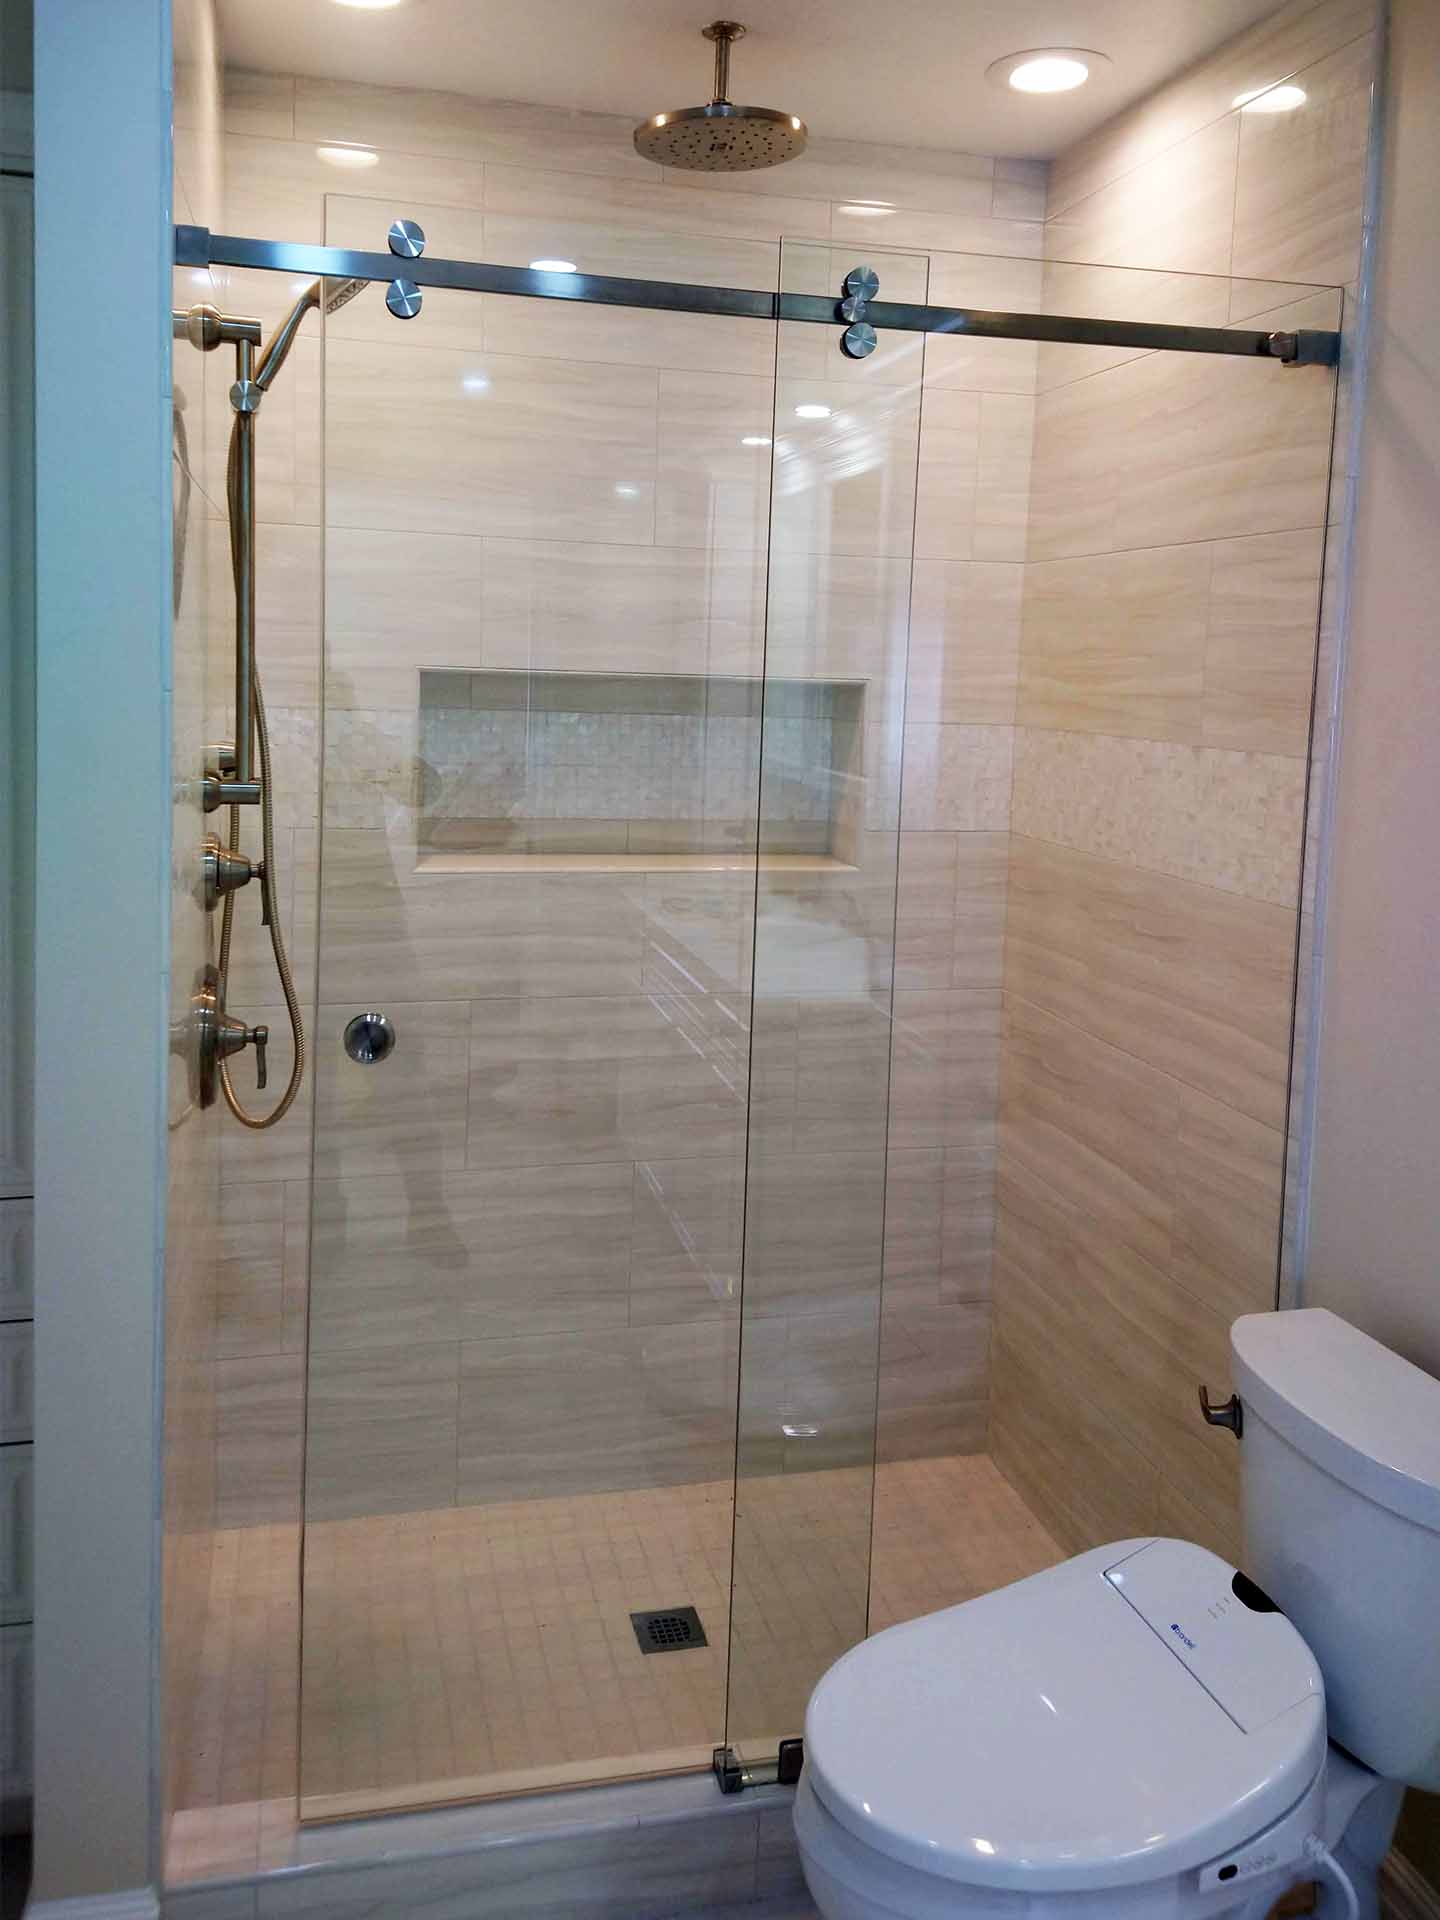 Compact luxory bathroom with sliding frameless glass shower doors.